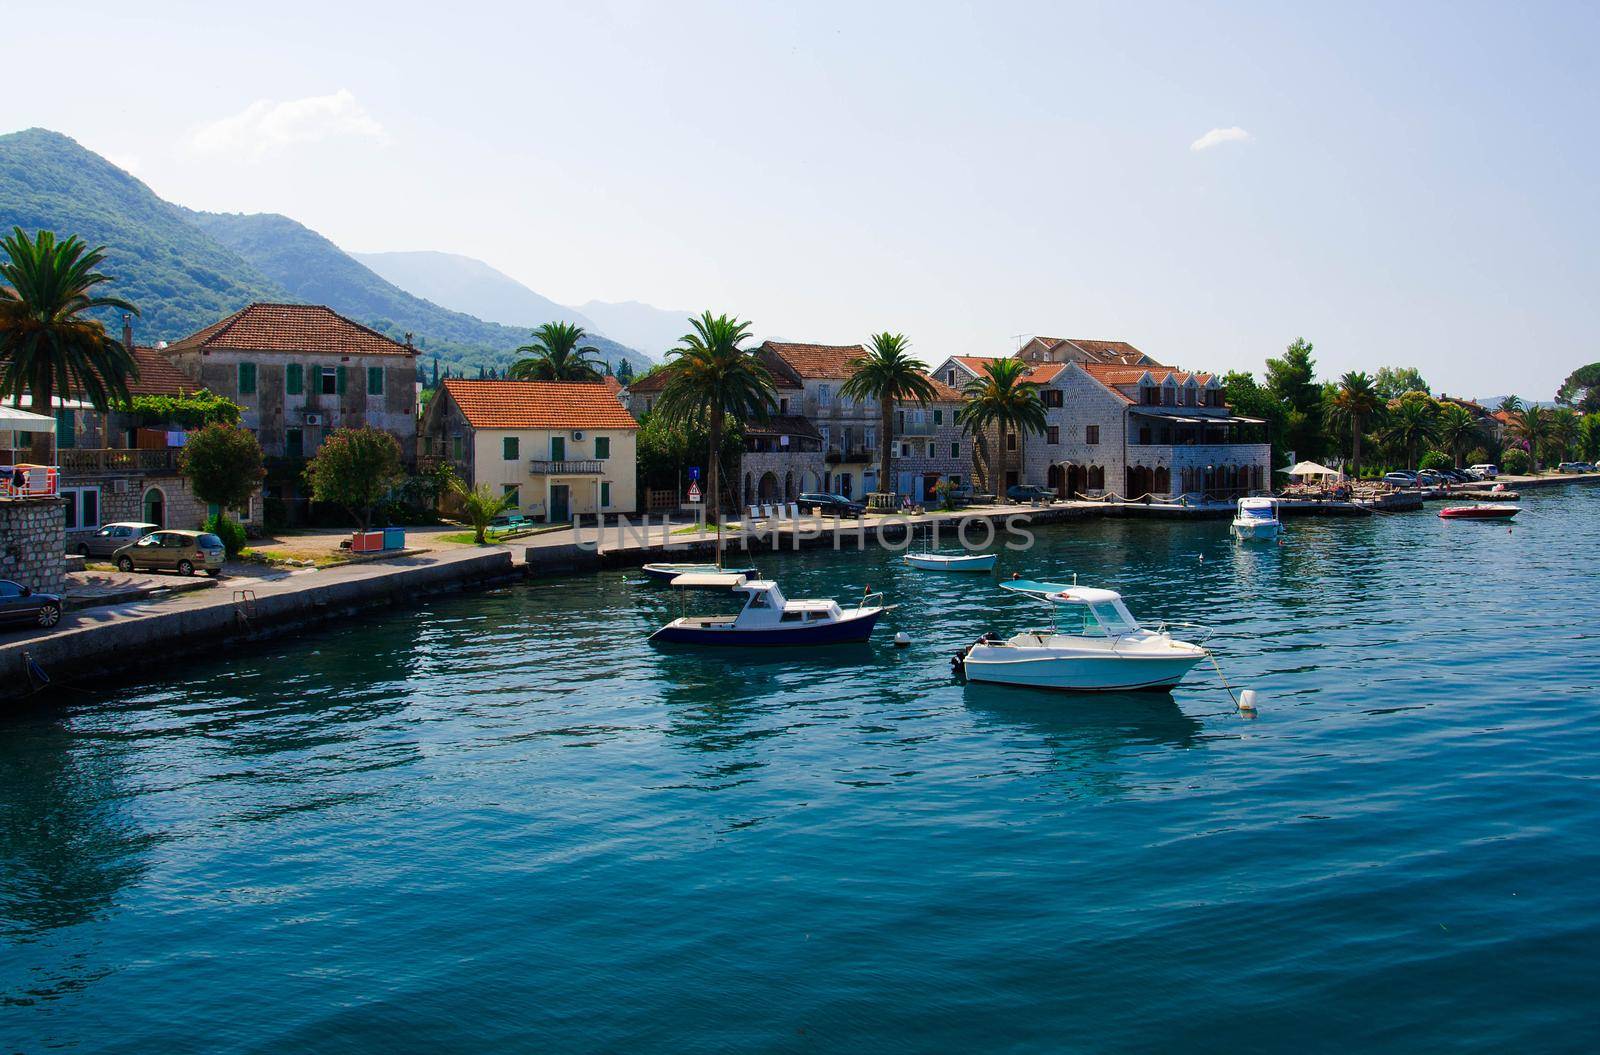 Yachts and fishing boats on the water near seaside village with palms and buildings with red tiled roofs on a sunny day, Bay of Kotor, Tivat, Seljanovo, Montenegro